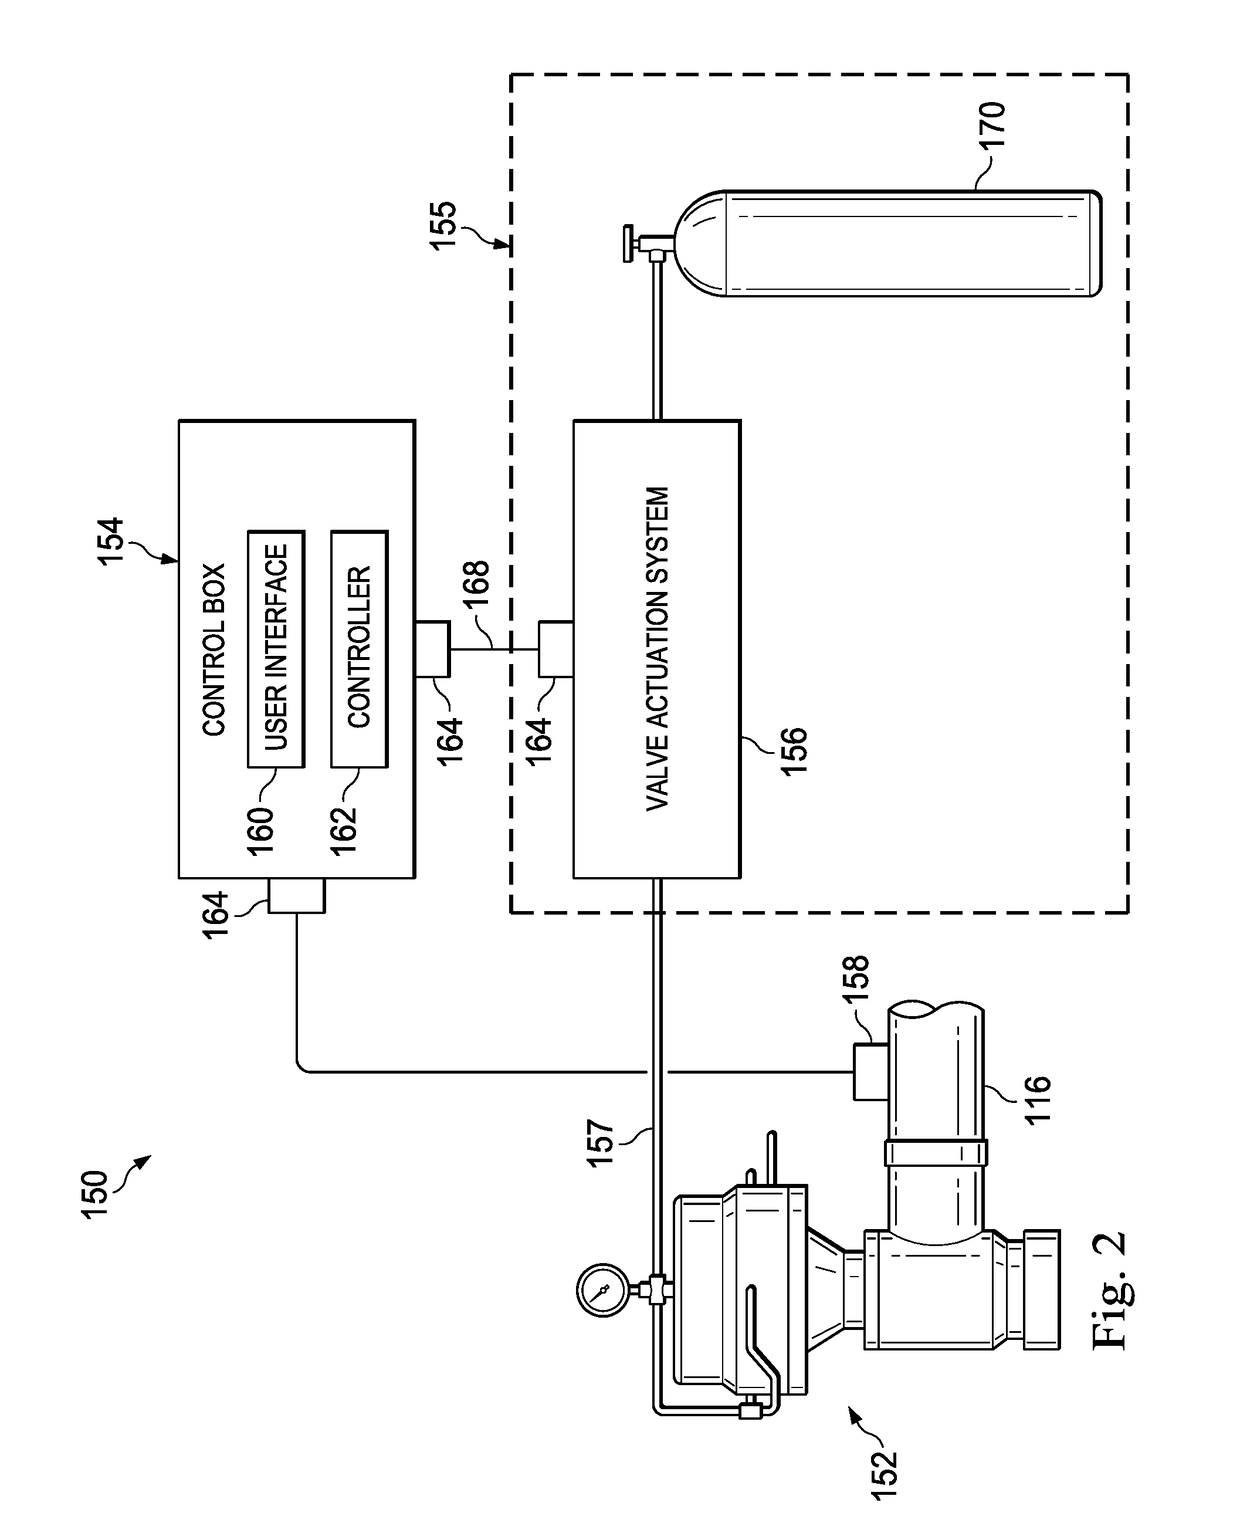 Field pressure test control system and methods